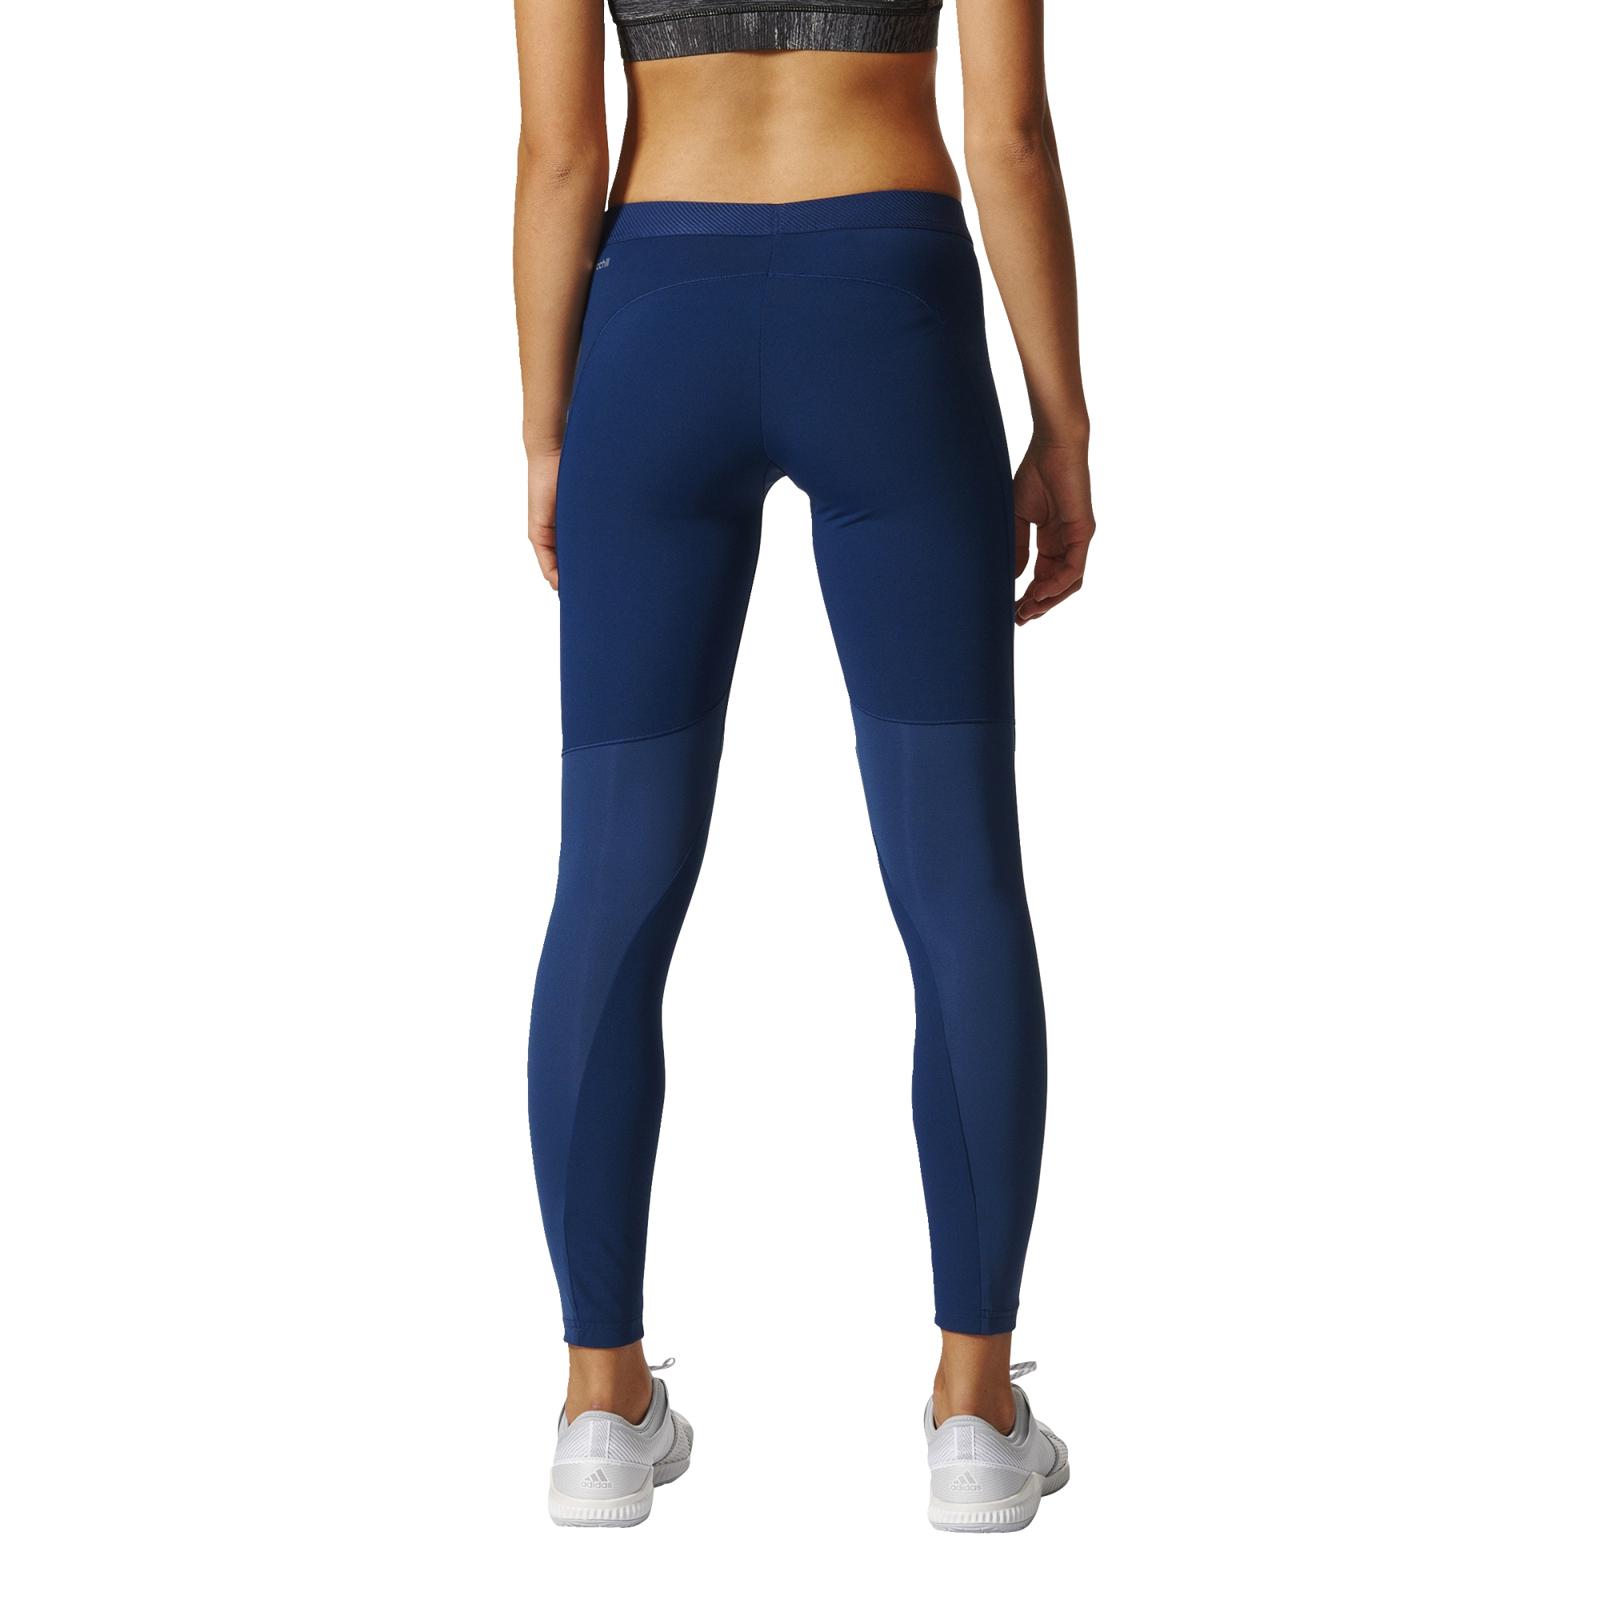 adidas climachill tights